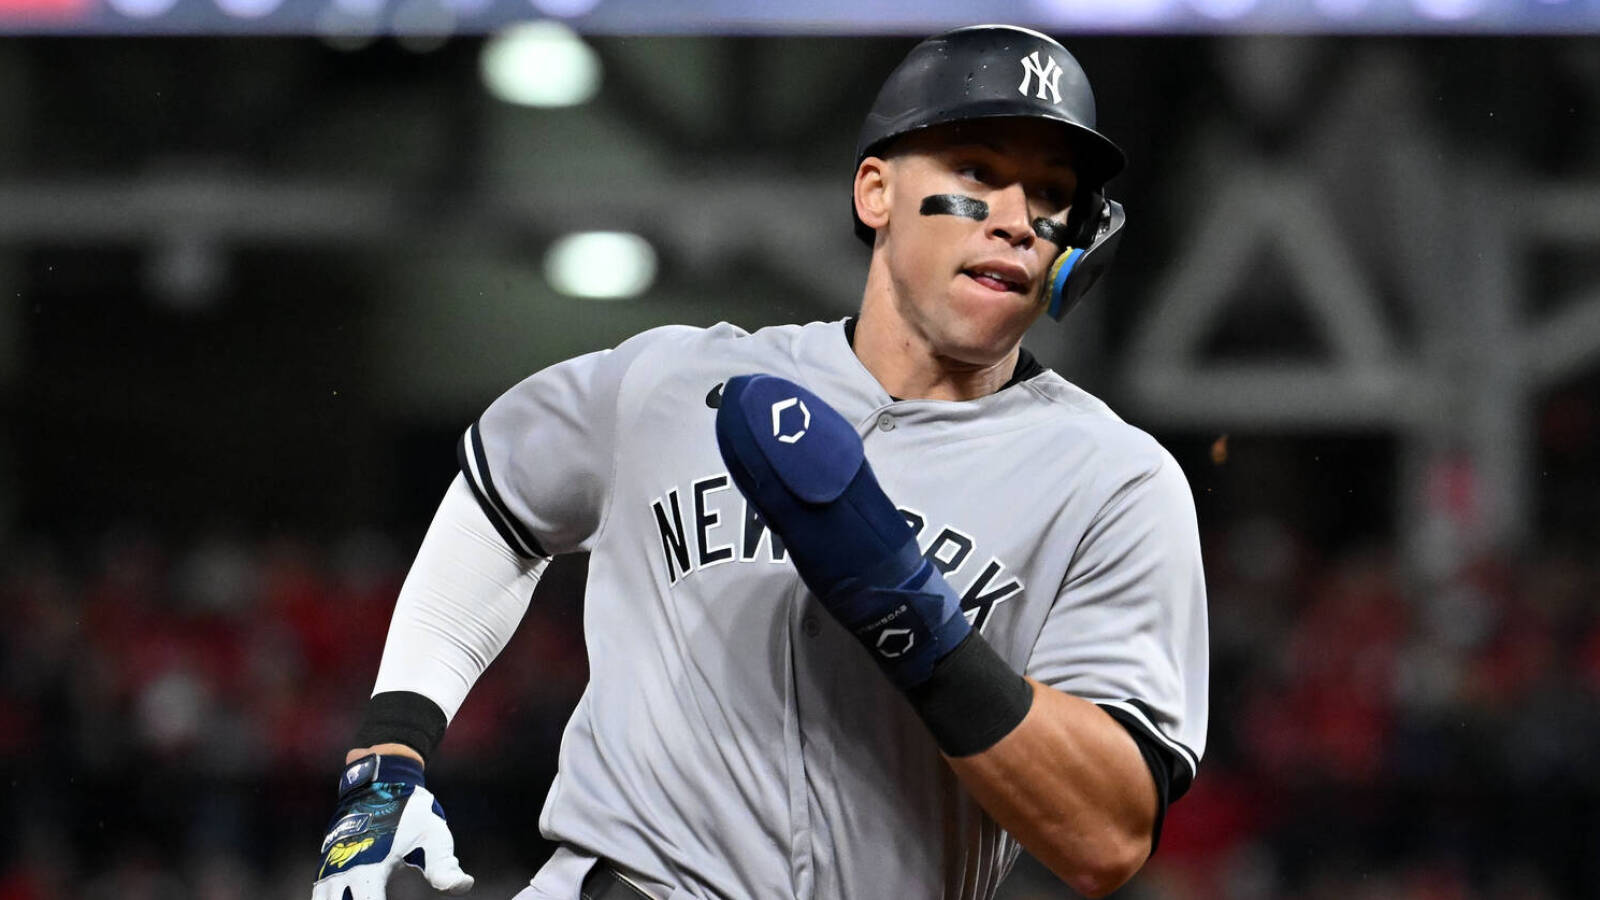 On Monday, Yankees had uniforms, eye black on ready for Game 5